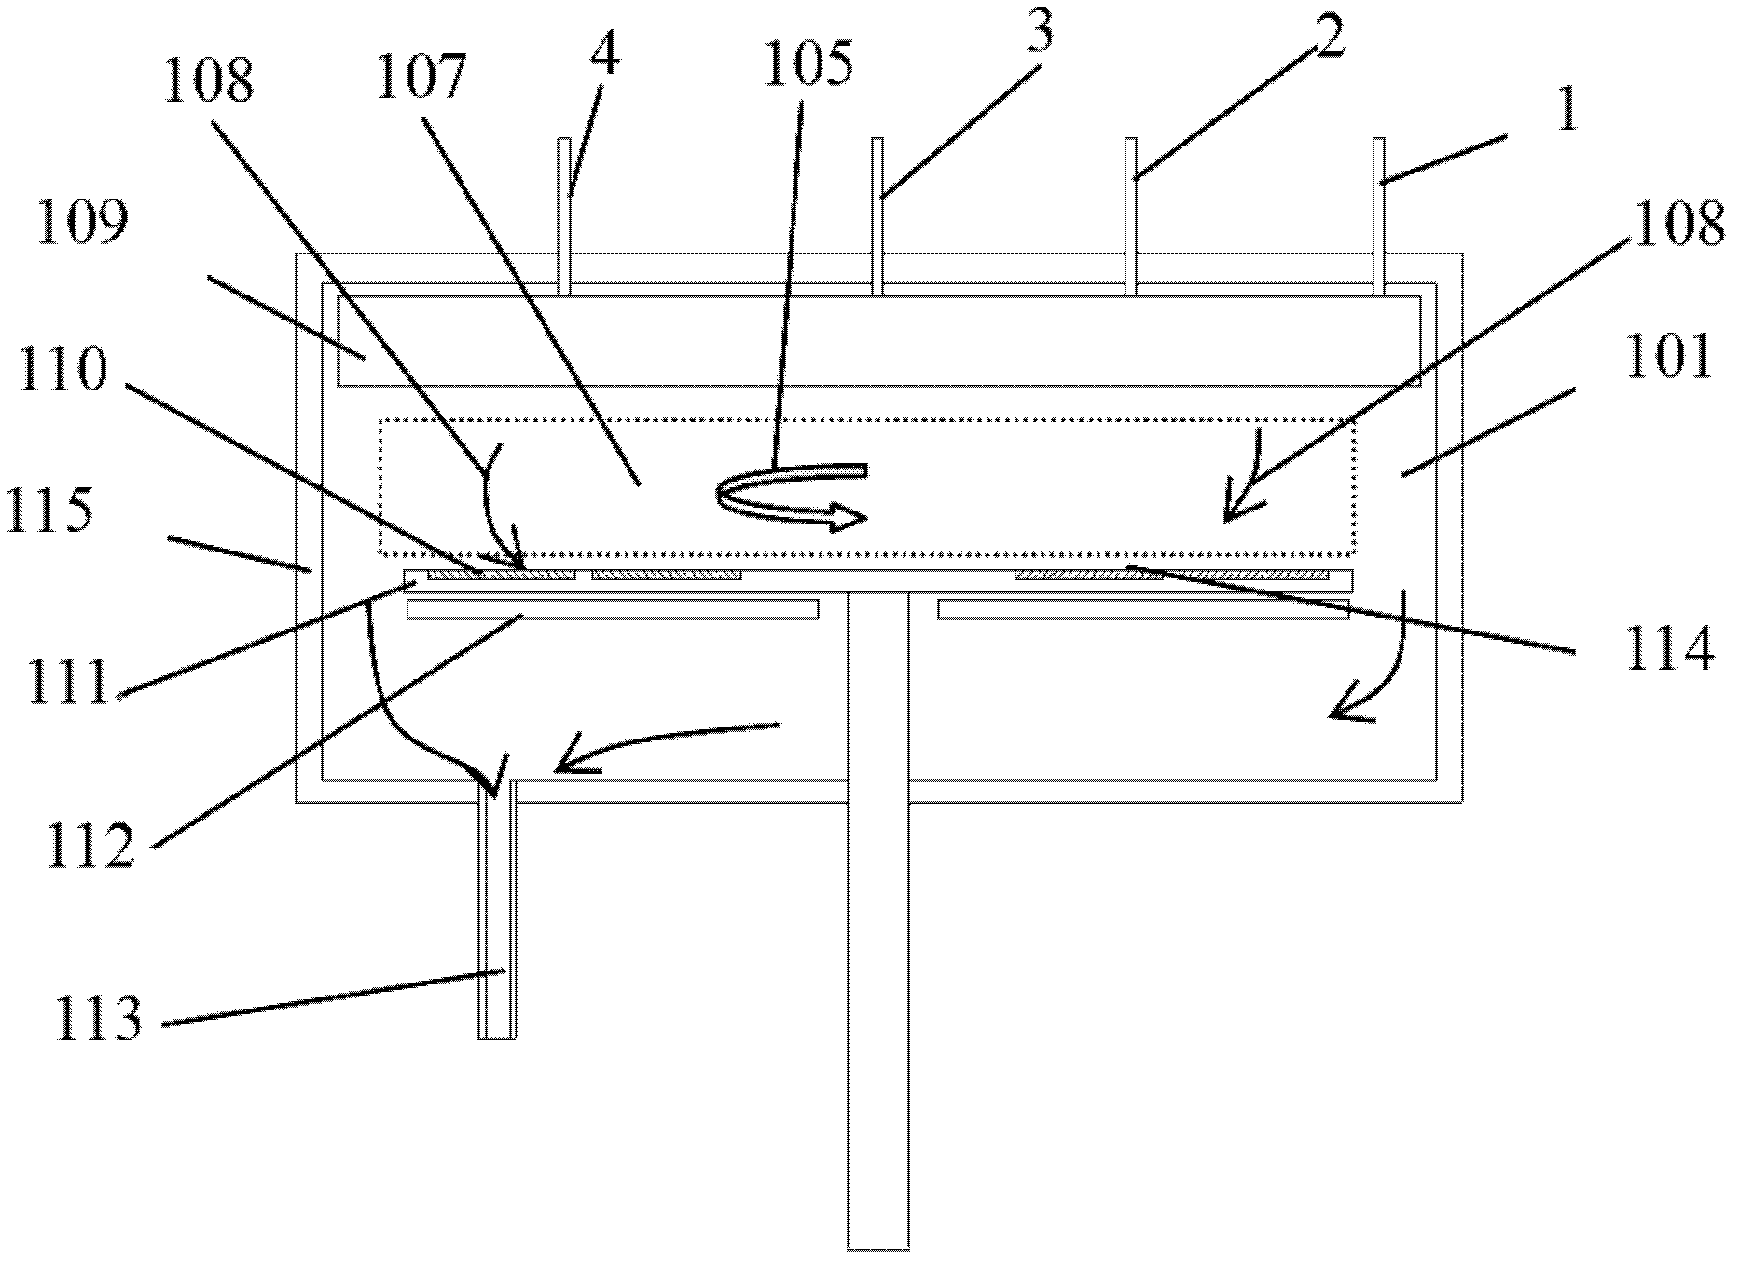 Inclined entering gas spray header applied to metal organic chemical vapor deposition reactor